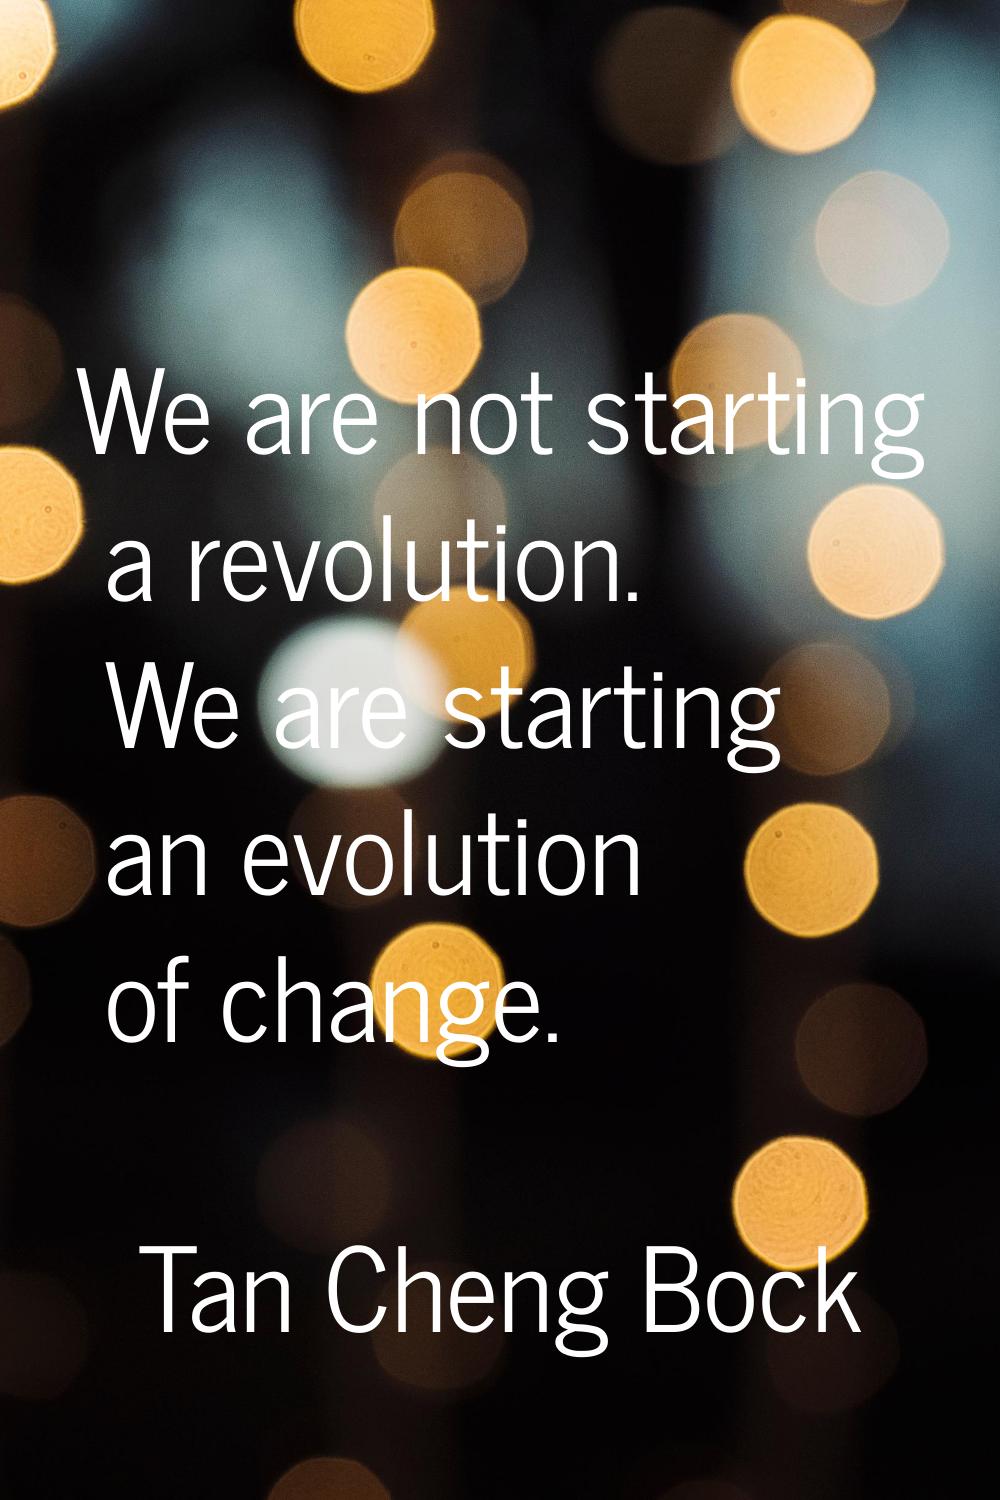 We are not starting a revolution. We are starting an evolution of change.